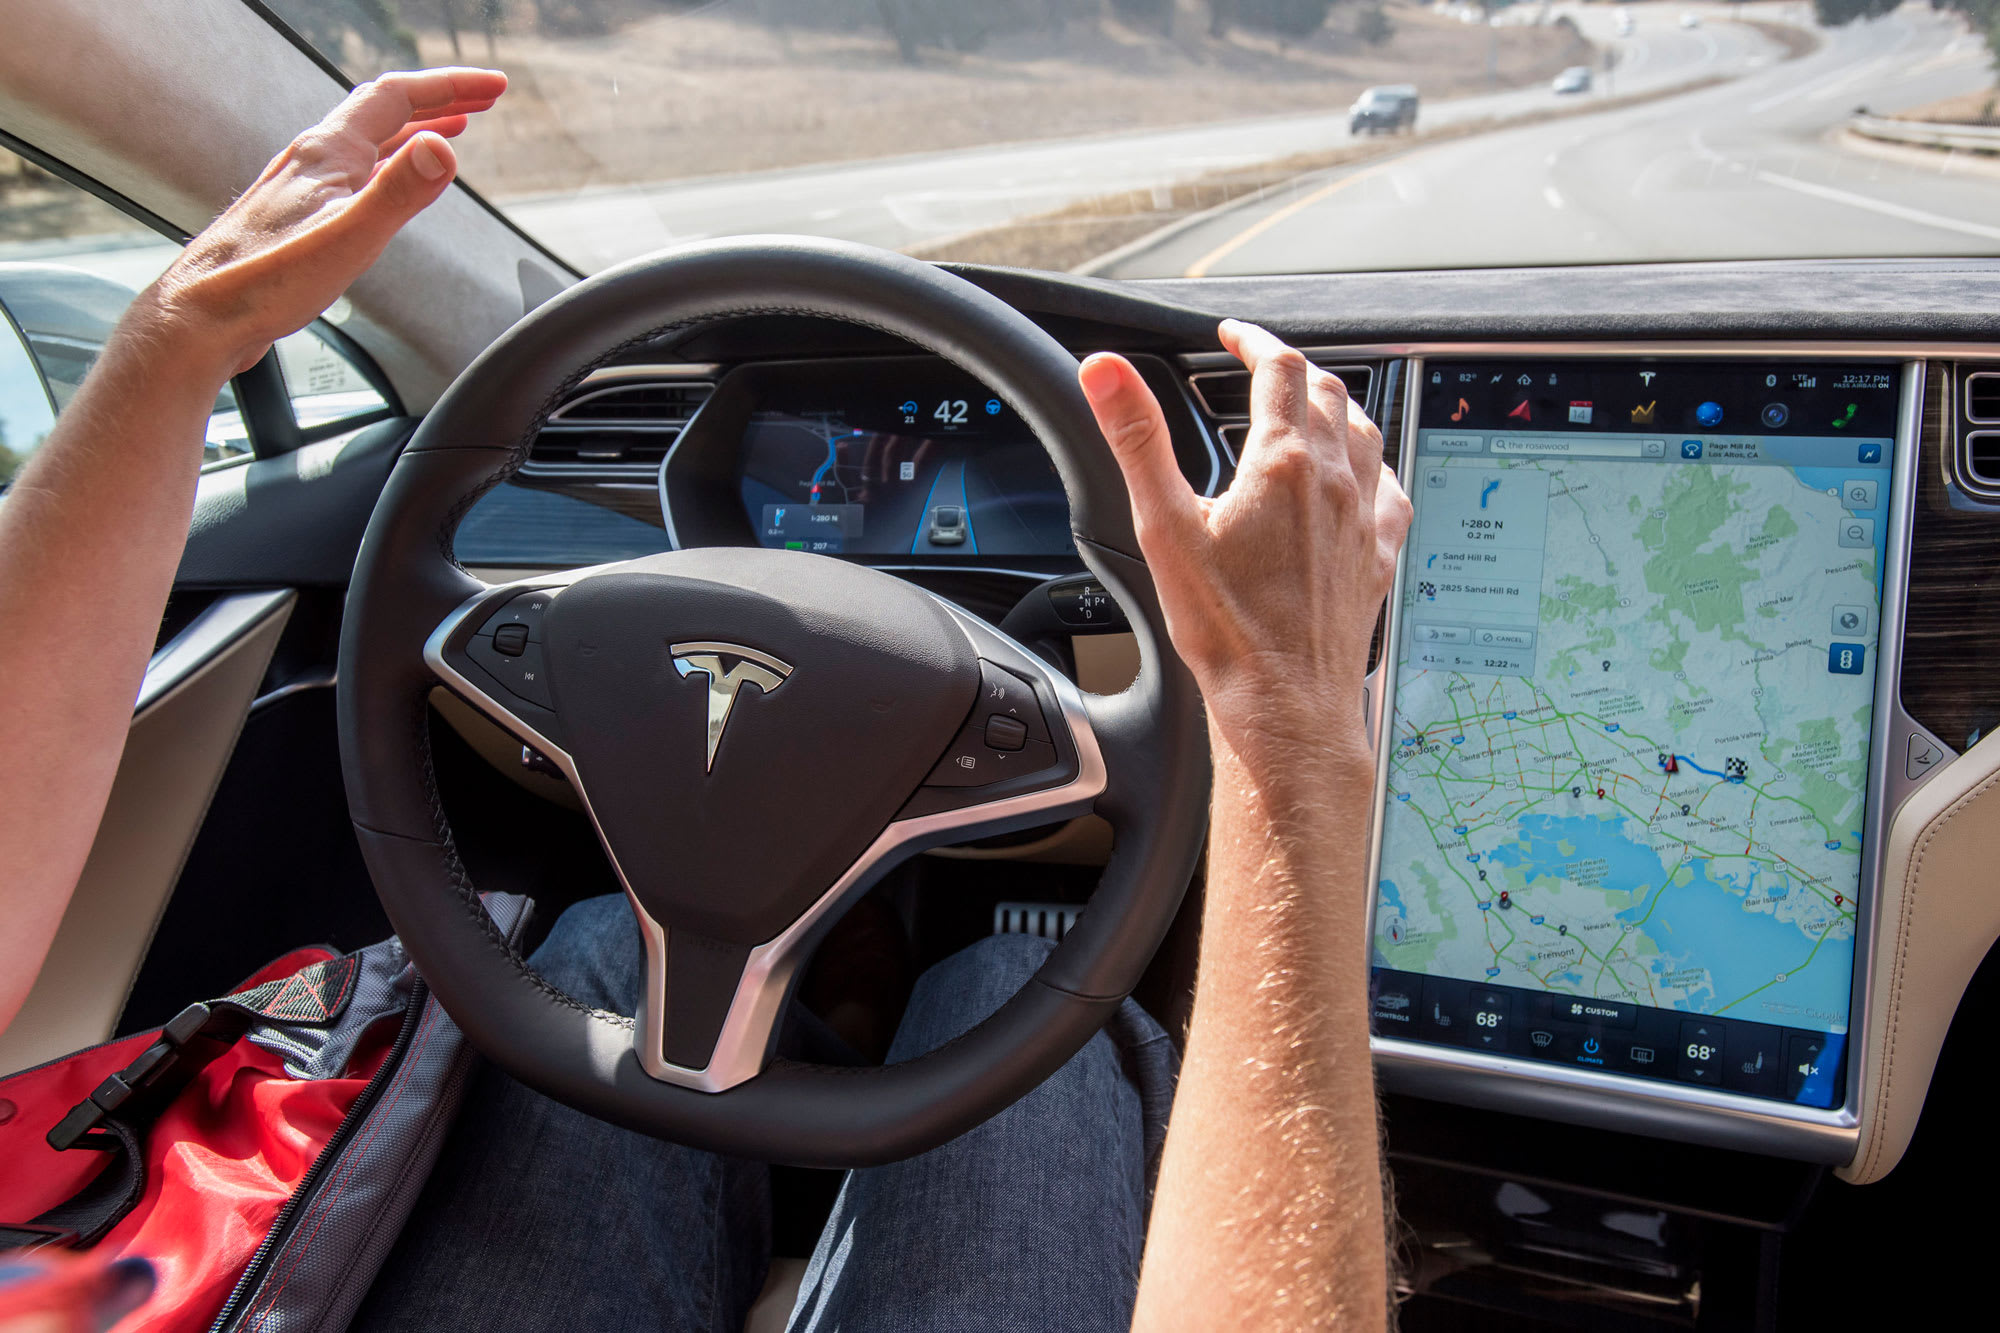 German court rules that Tesla misled consumers on Autopilot and Full Self Driving